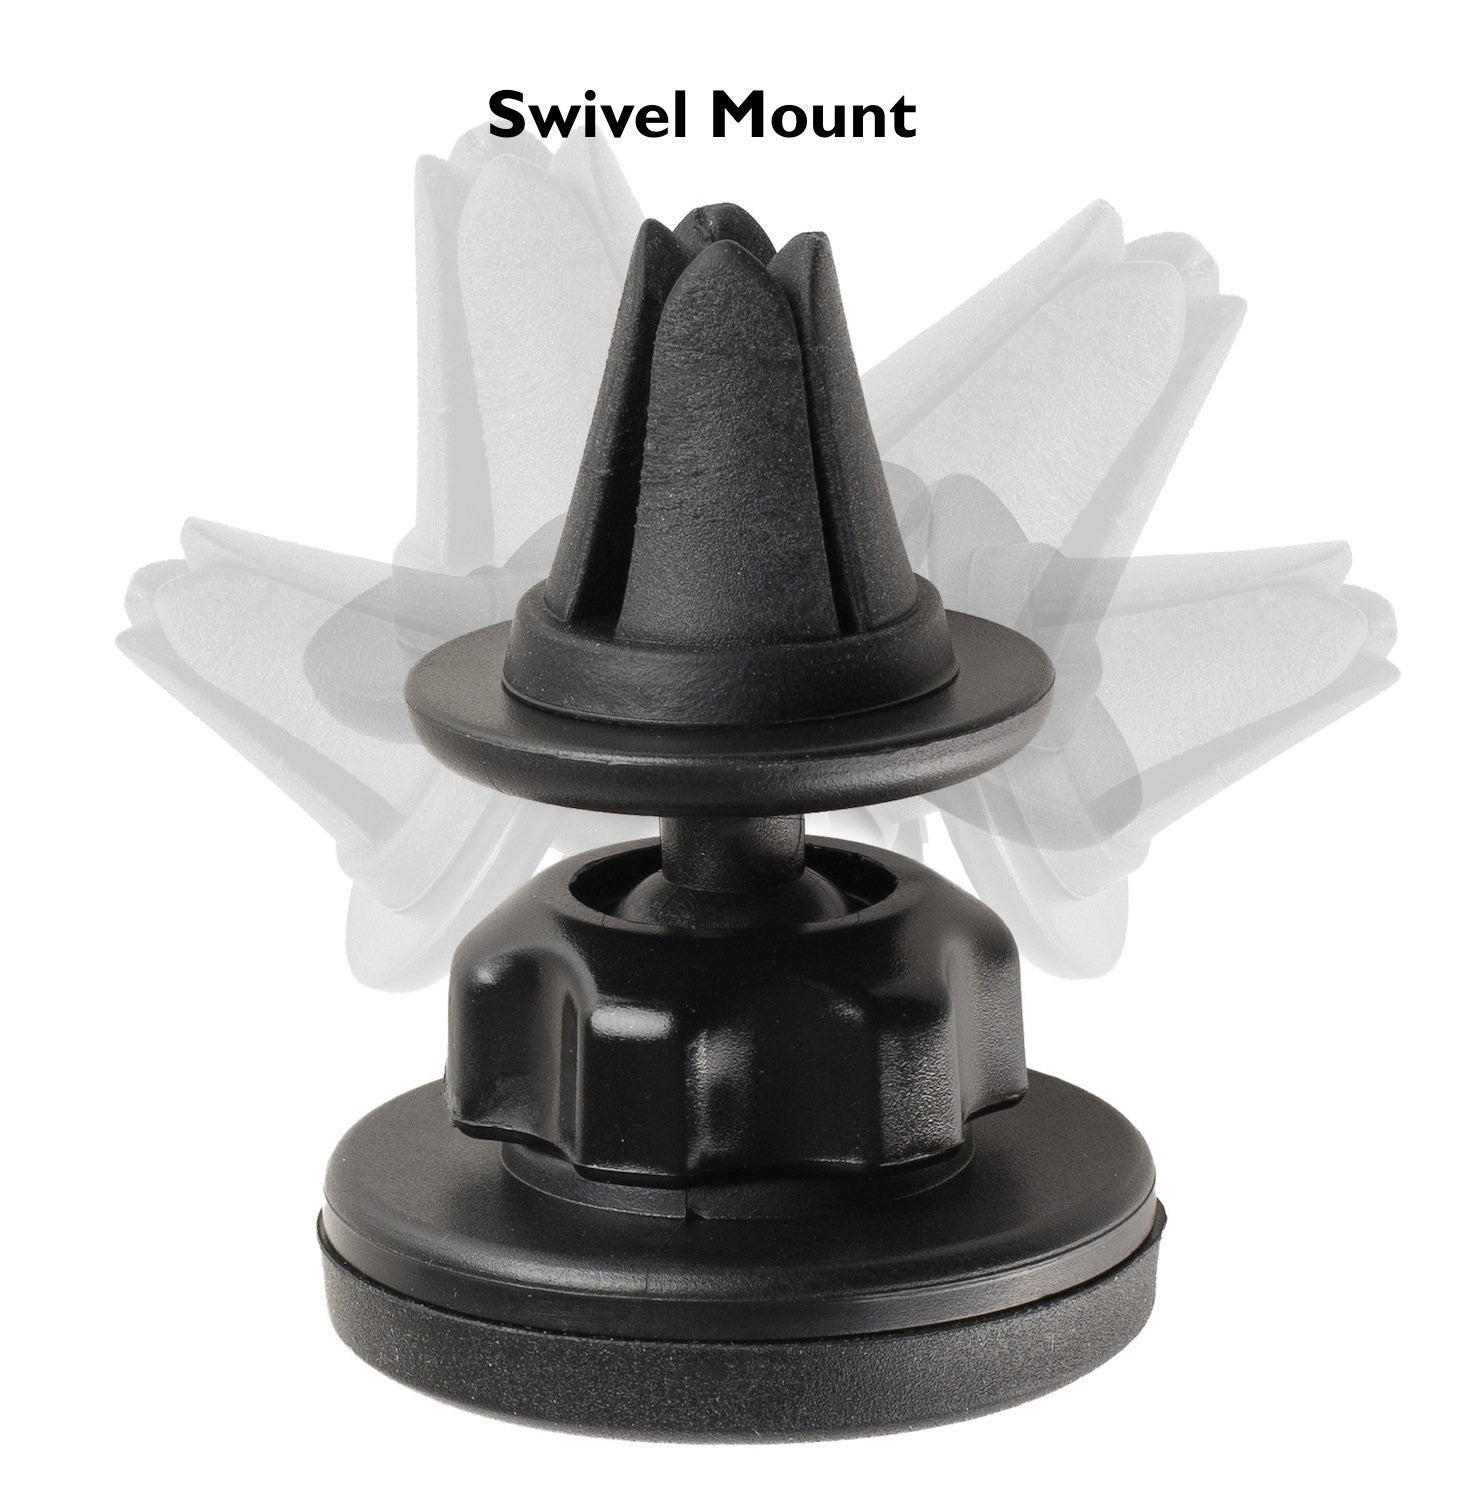 WizGear Universal Air Vent Magnetic Car Mount Holder, for Cell Phones and Mini-Tablets With Swivel Head